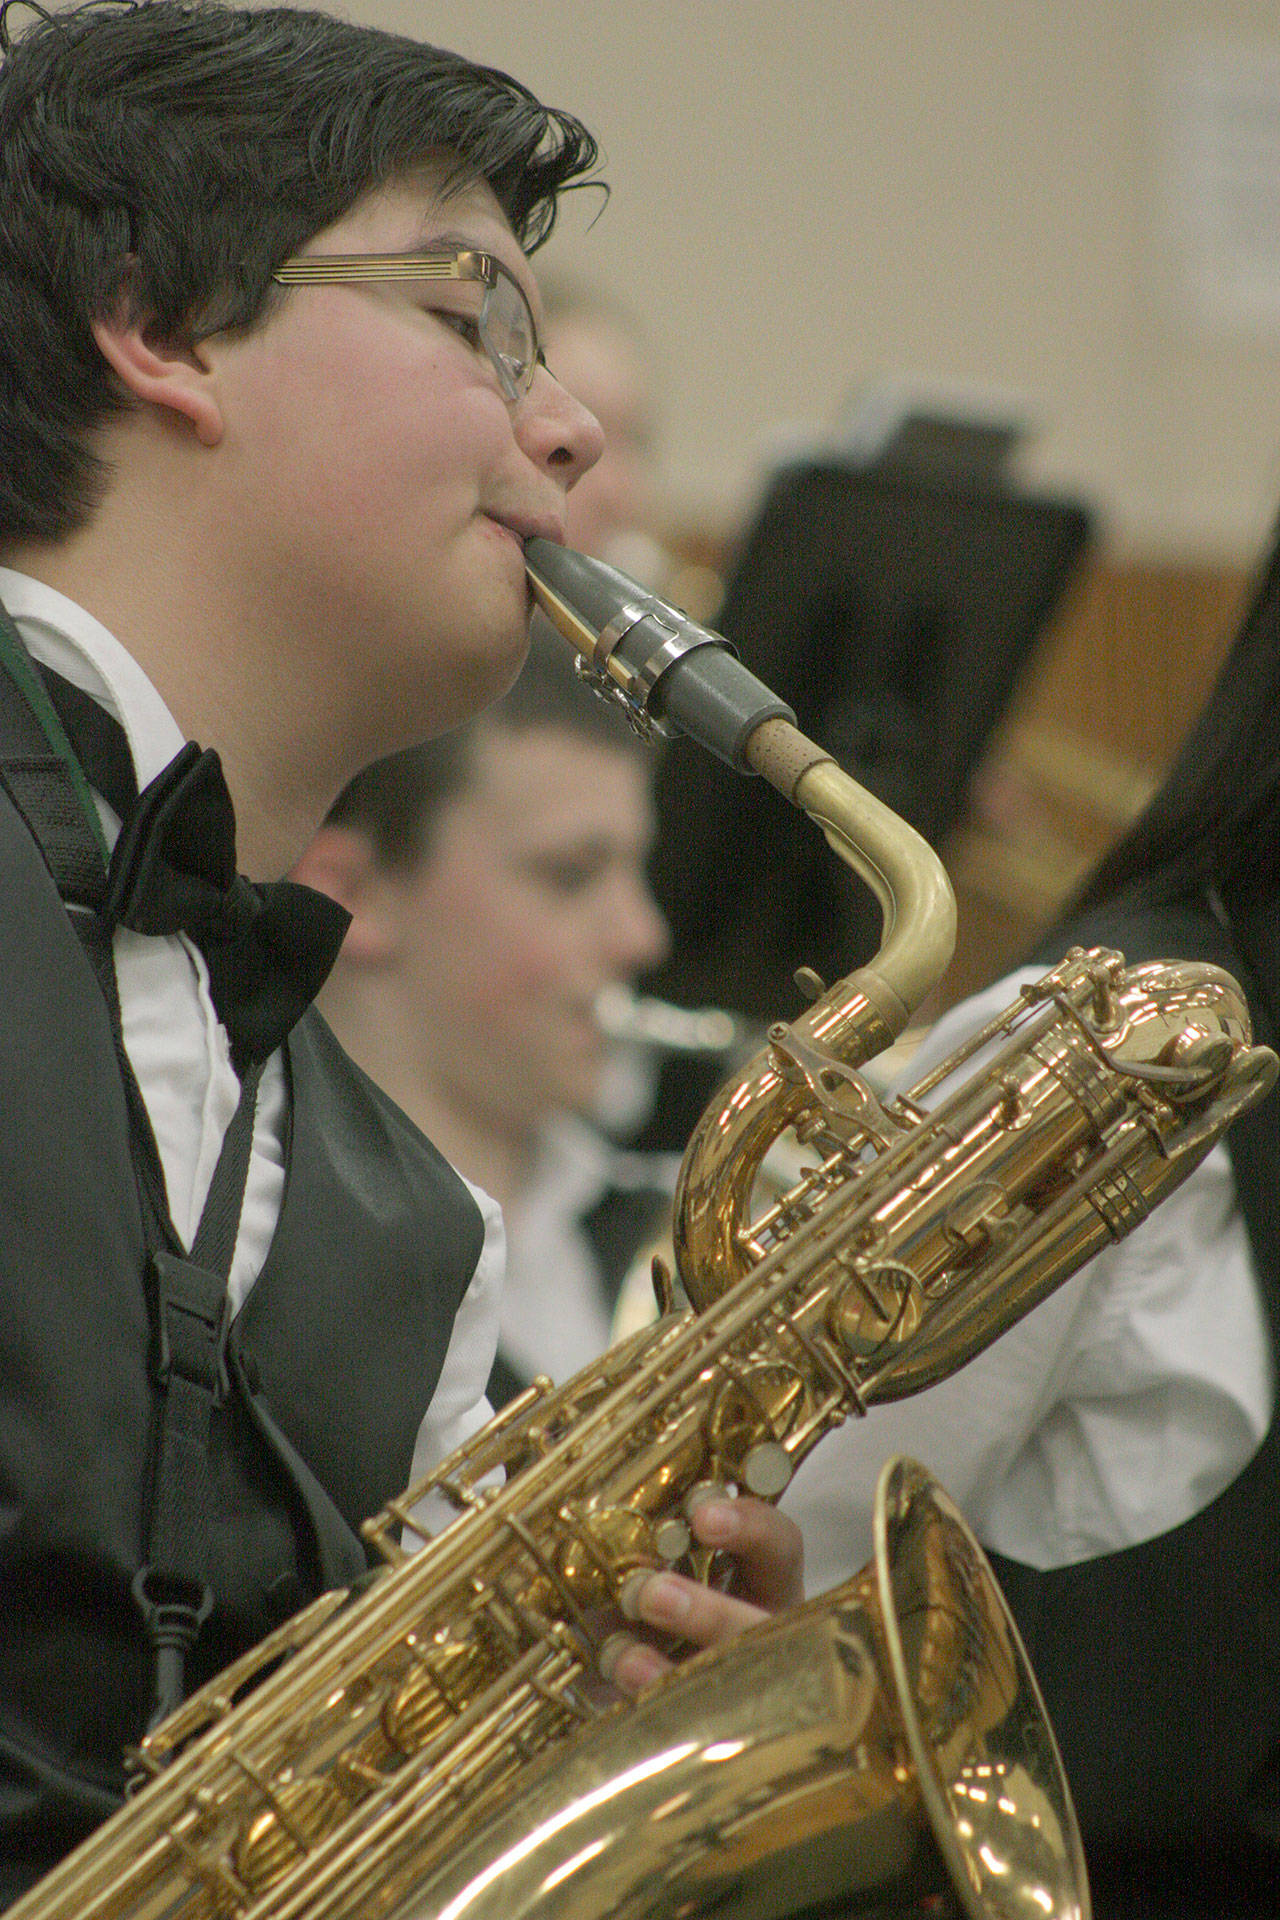 Darwin Gomez, an eighth-grader with the Meeker Middle School Jazz Band, plays “St. Louis Blues” on his baritone saxophone during Kent Kids’ Arts Day last Saturday. MARK KLAAS, Kent Reporter